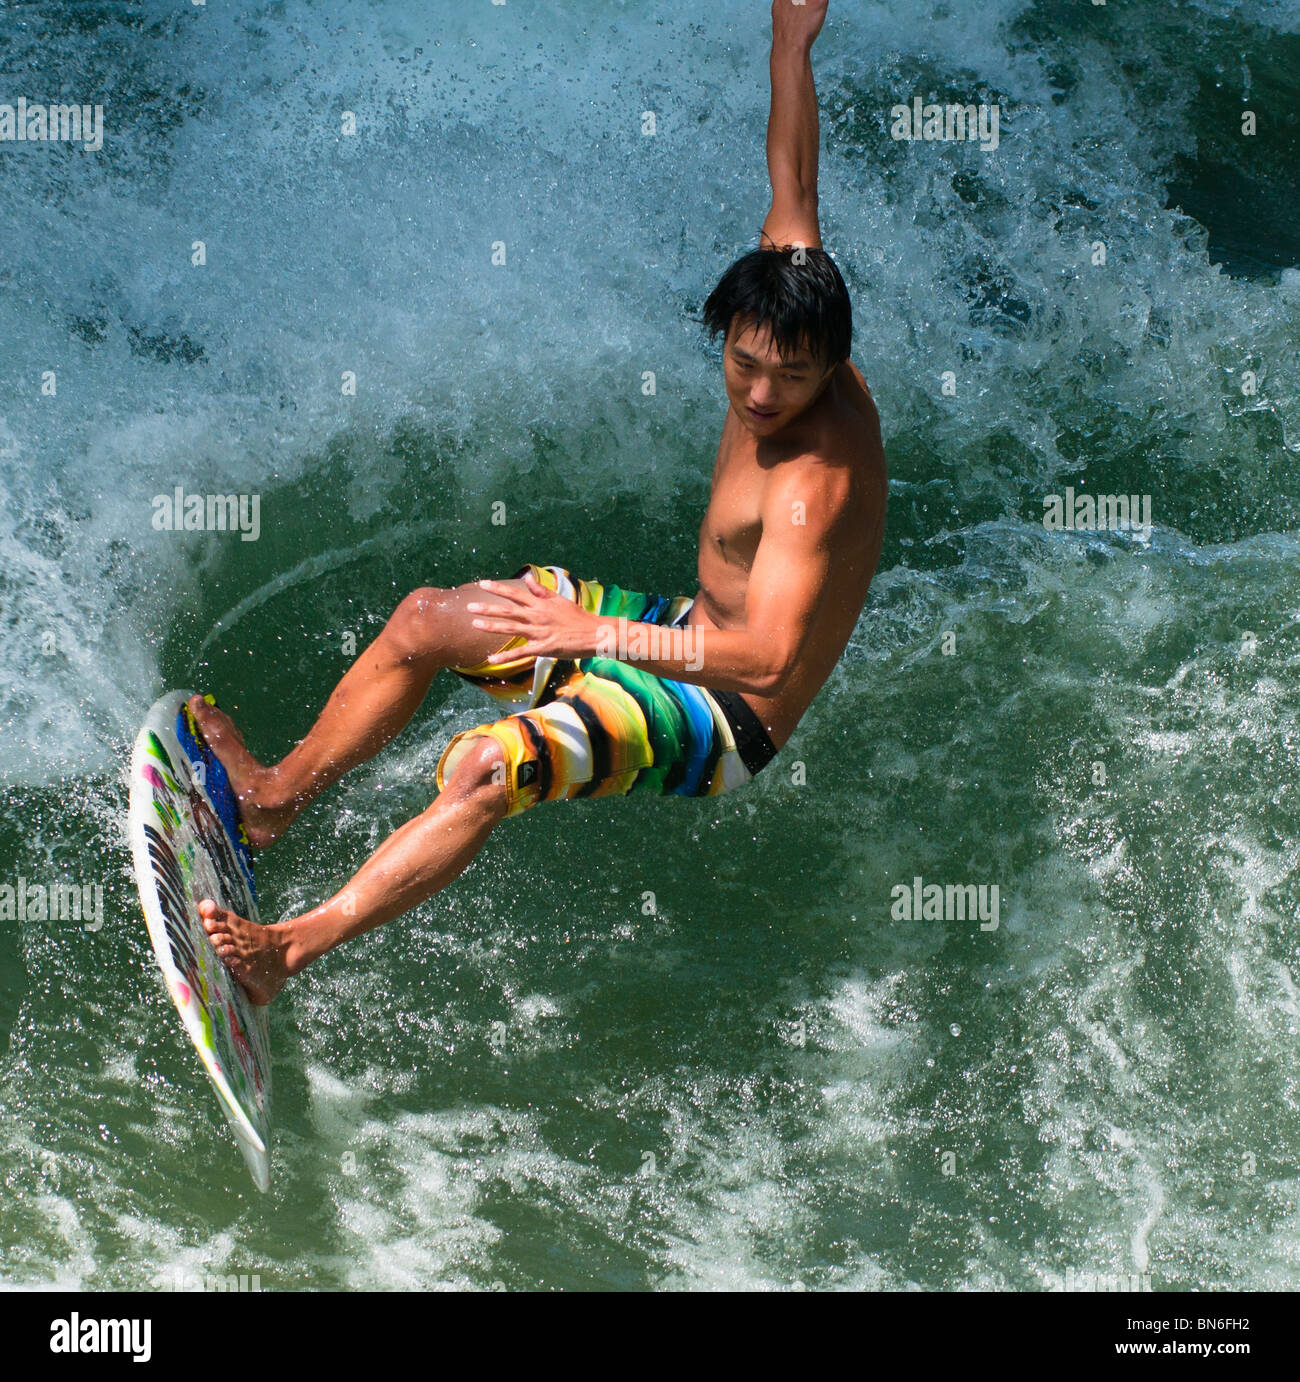 Surfer up close Stock Photo